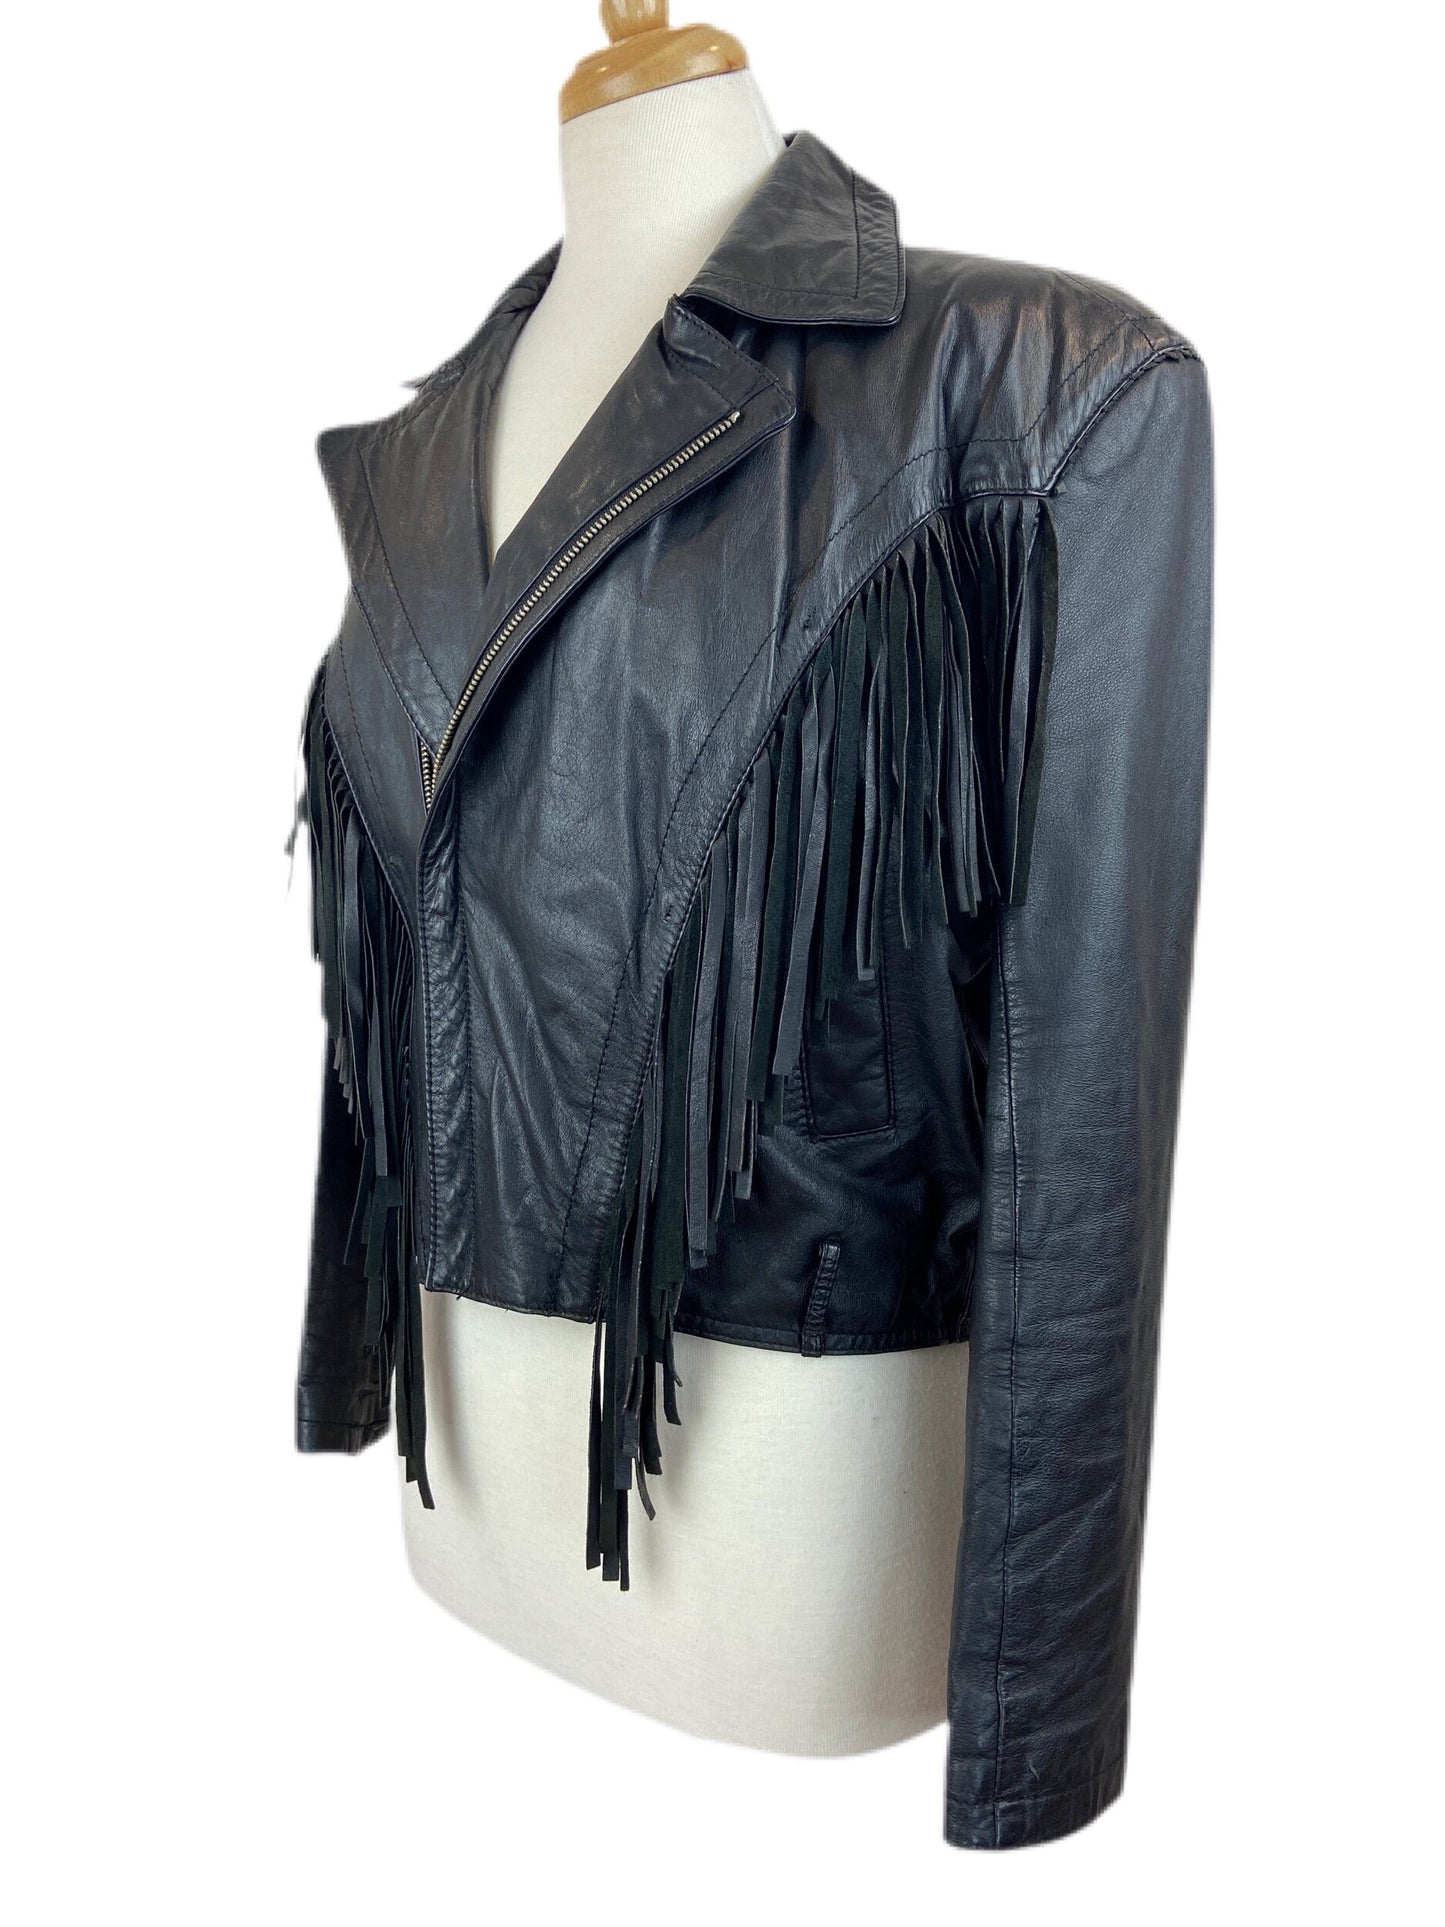 1980's Leather Fringe Jacket - Costume Piece from Feature Film "JT  Leroy" as Seen on Diane Krueger (M)